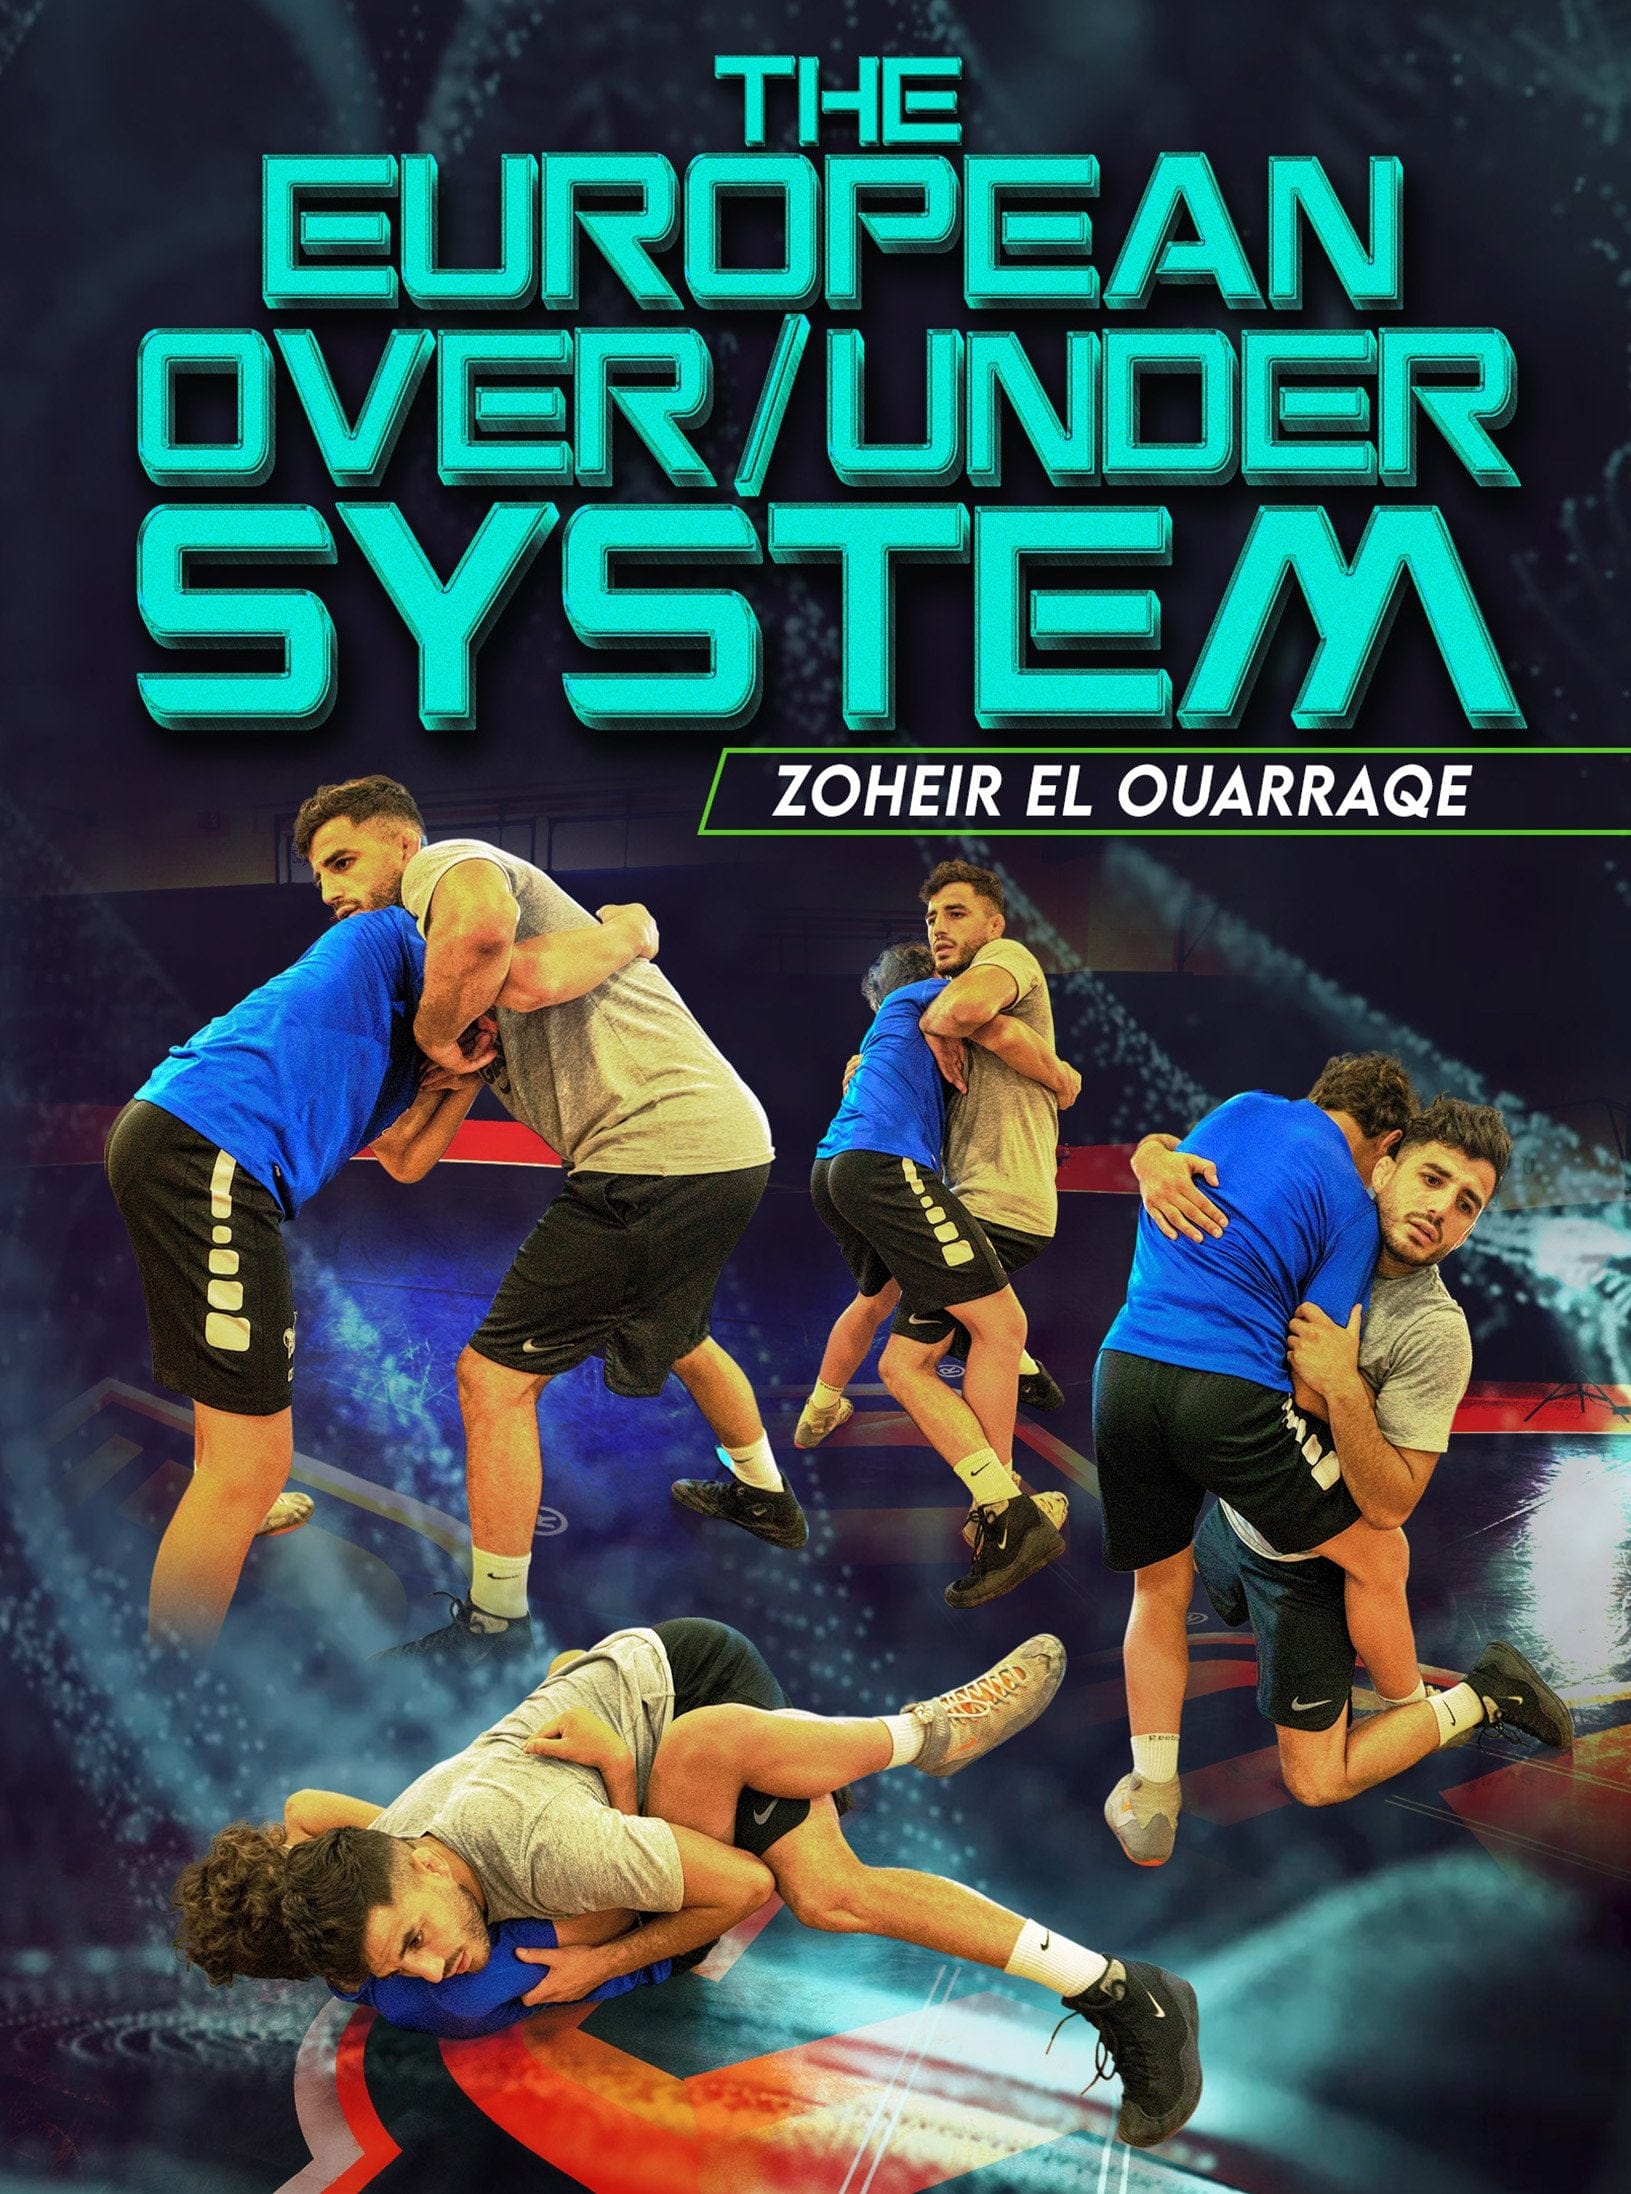 The European Over/Under System by Zoheir El Ouarraqe - Fanatic Wrestling